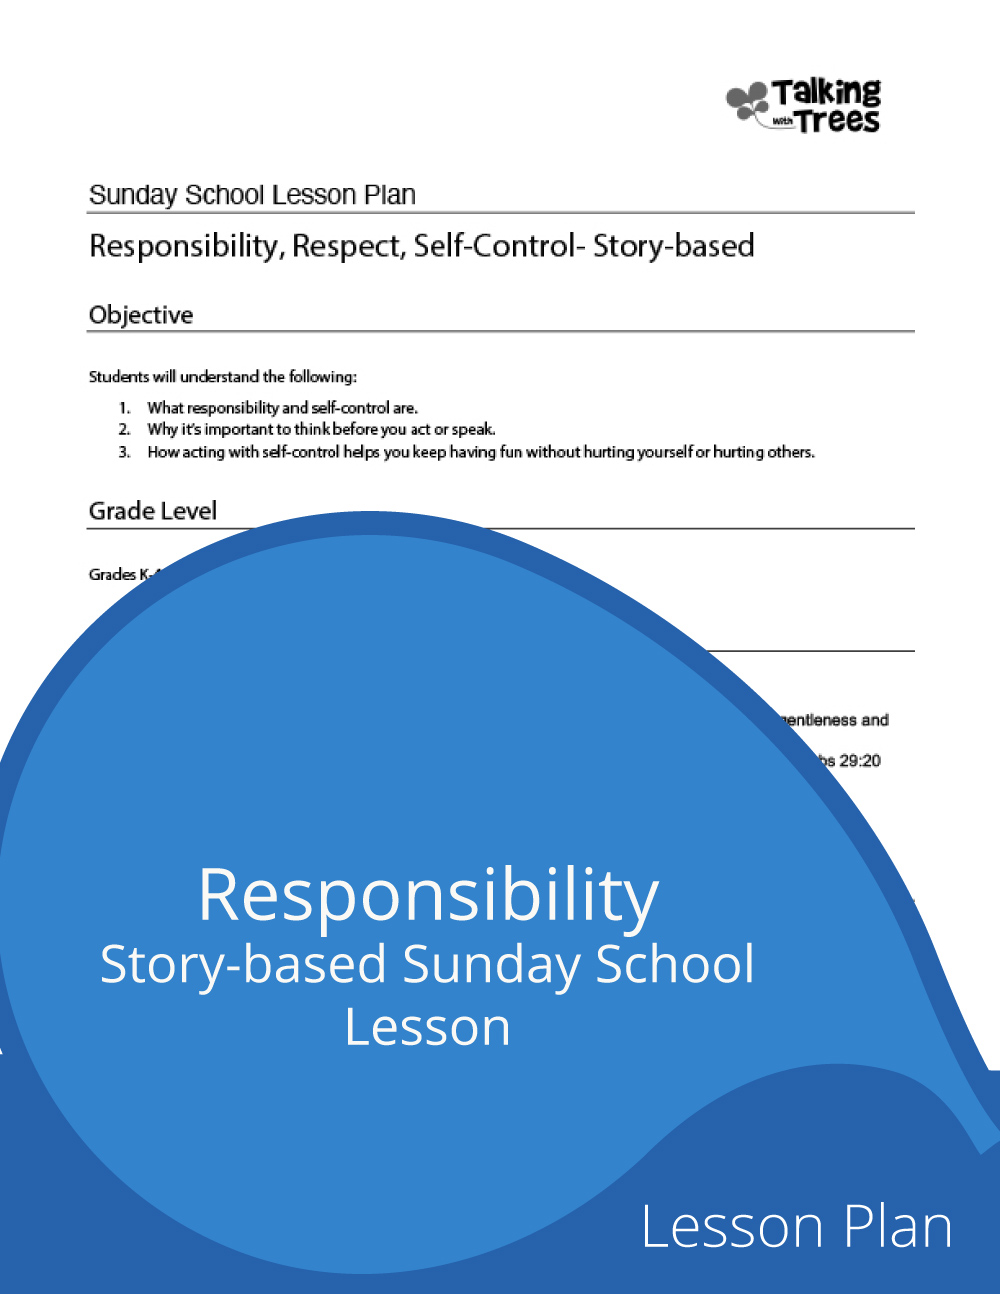 Responsibility & Respect lesson plan for Sunday School